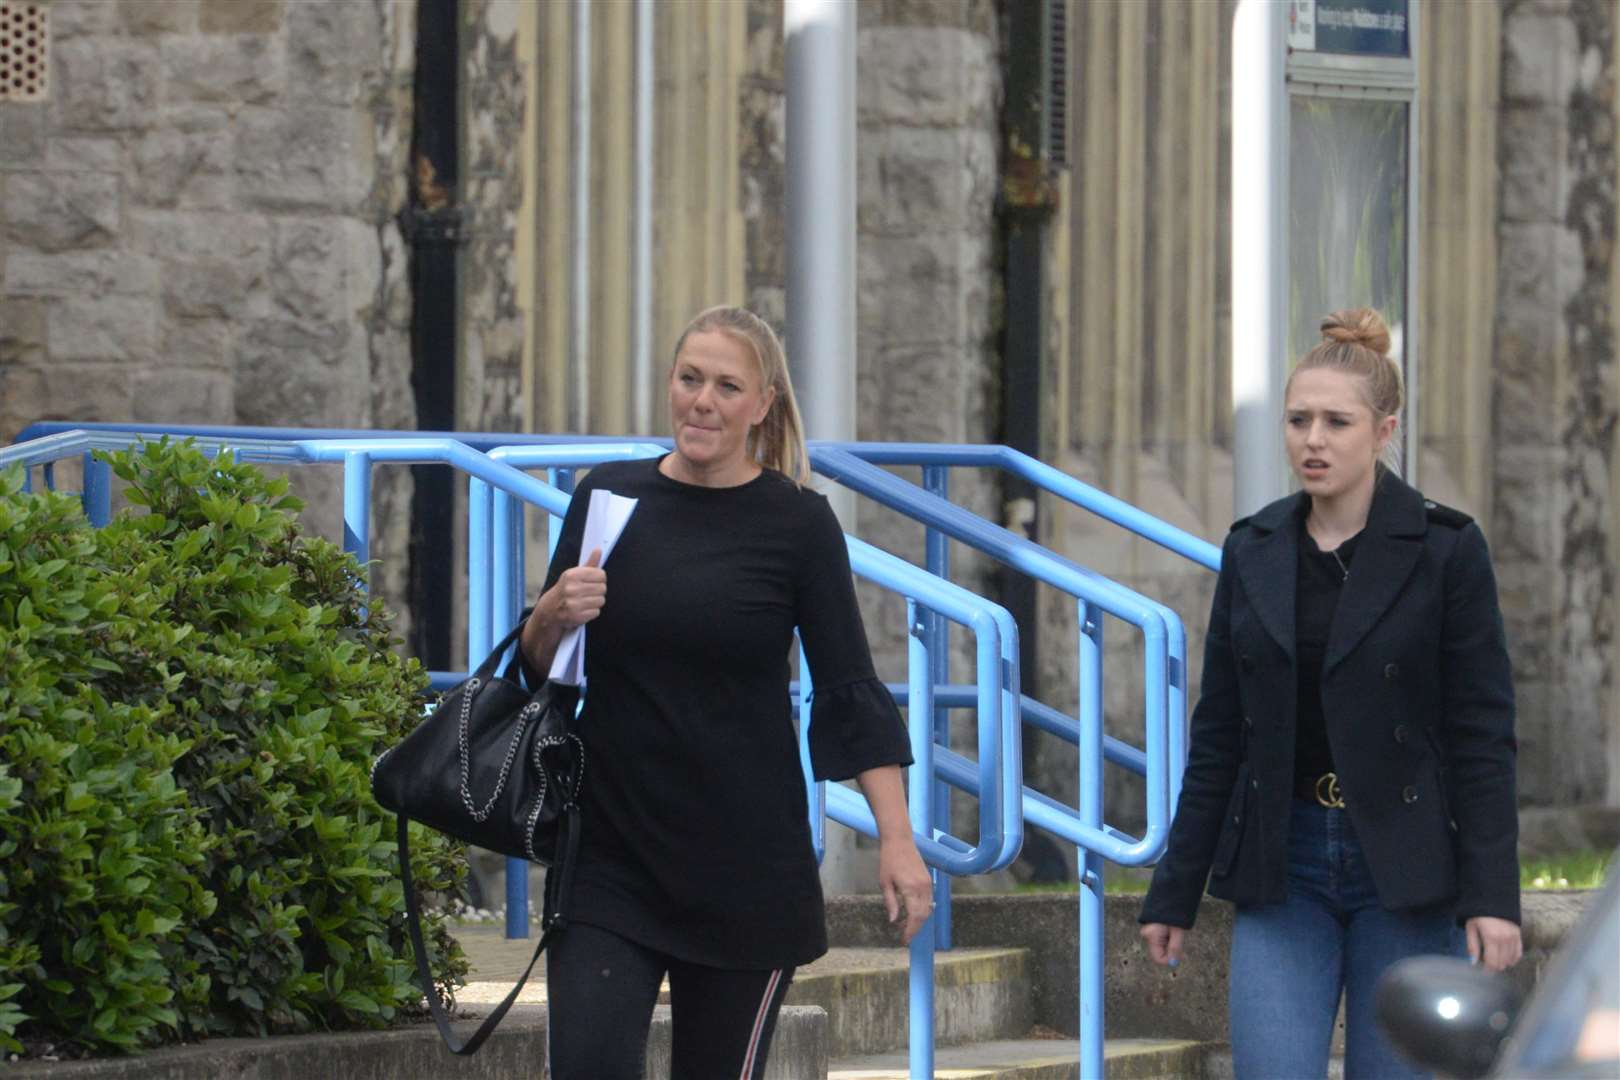 Julie and Olivia Cooke arriving at Maidstone Magistrates' Court